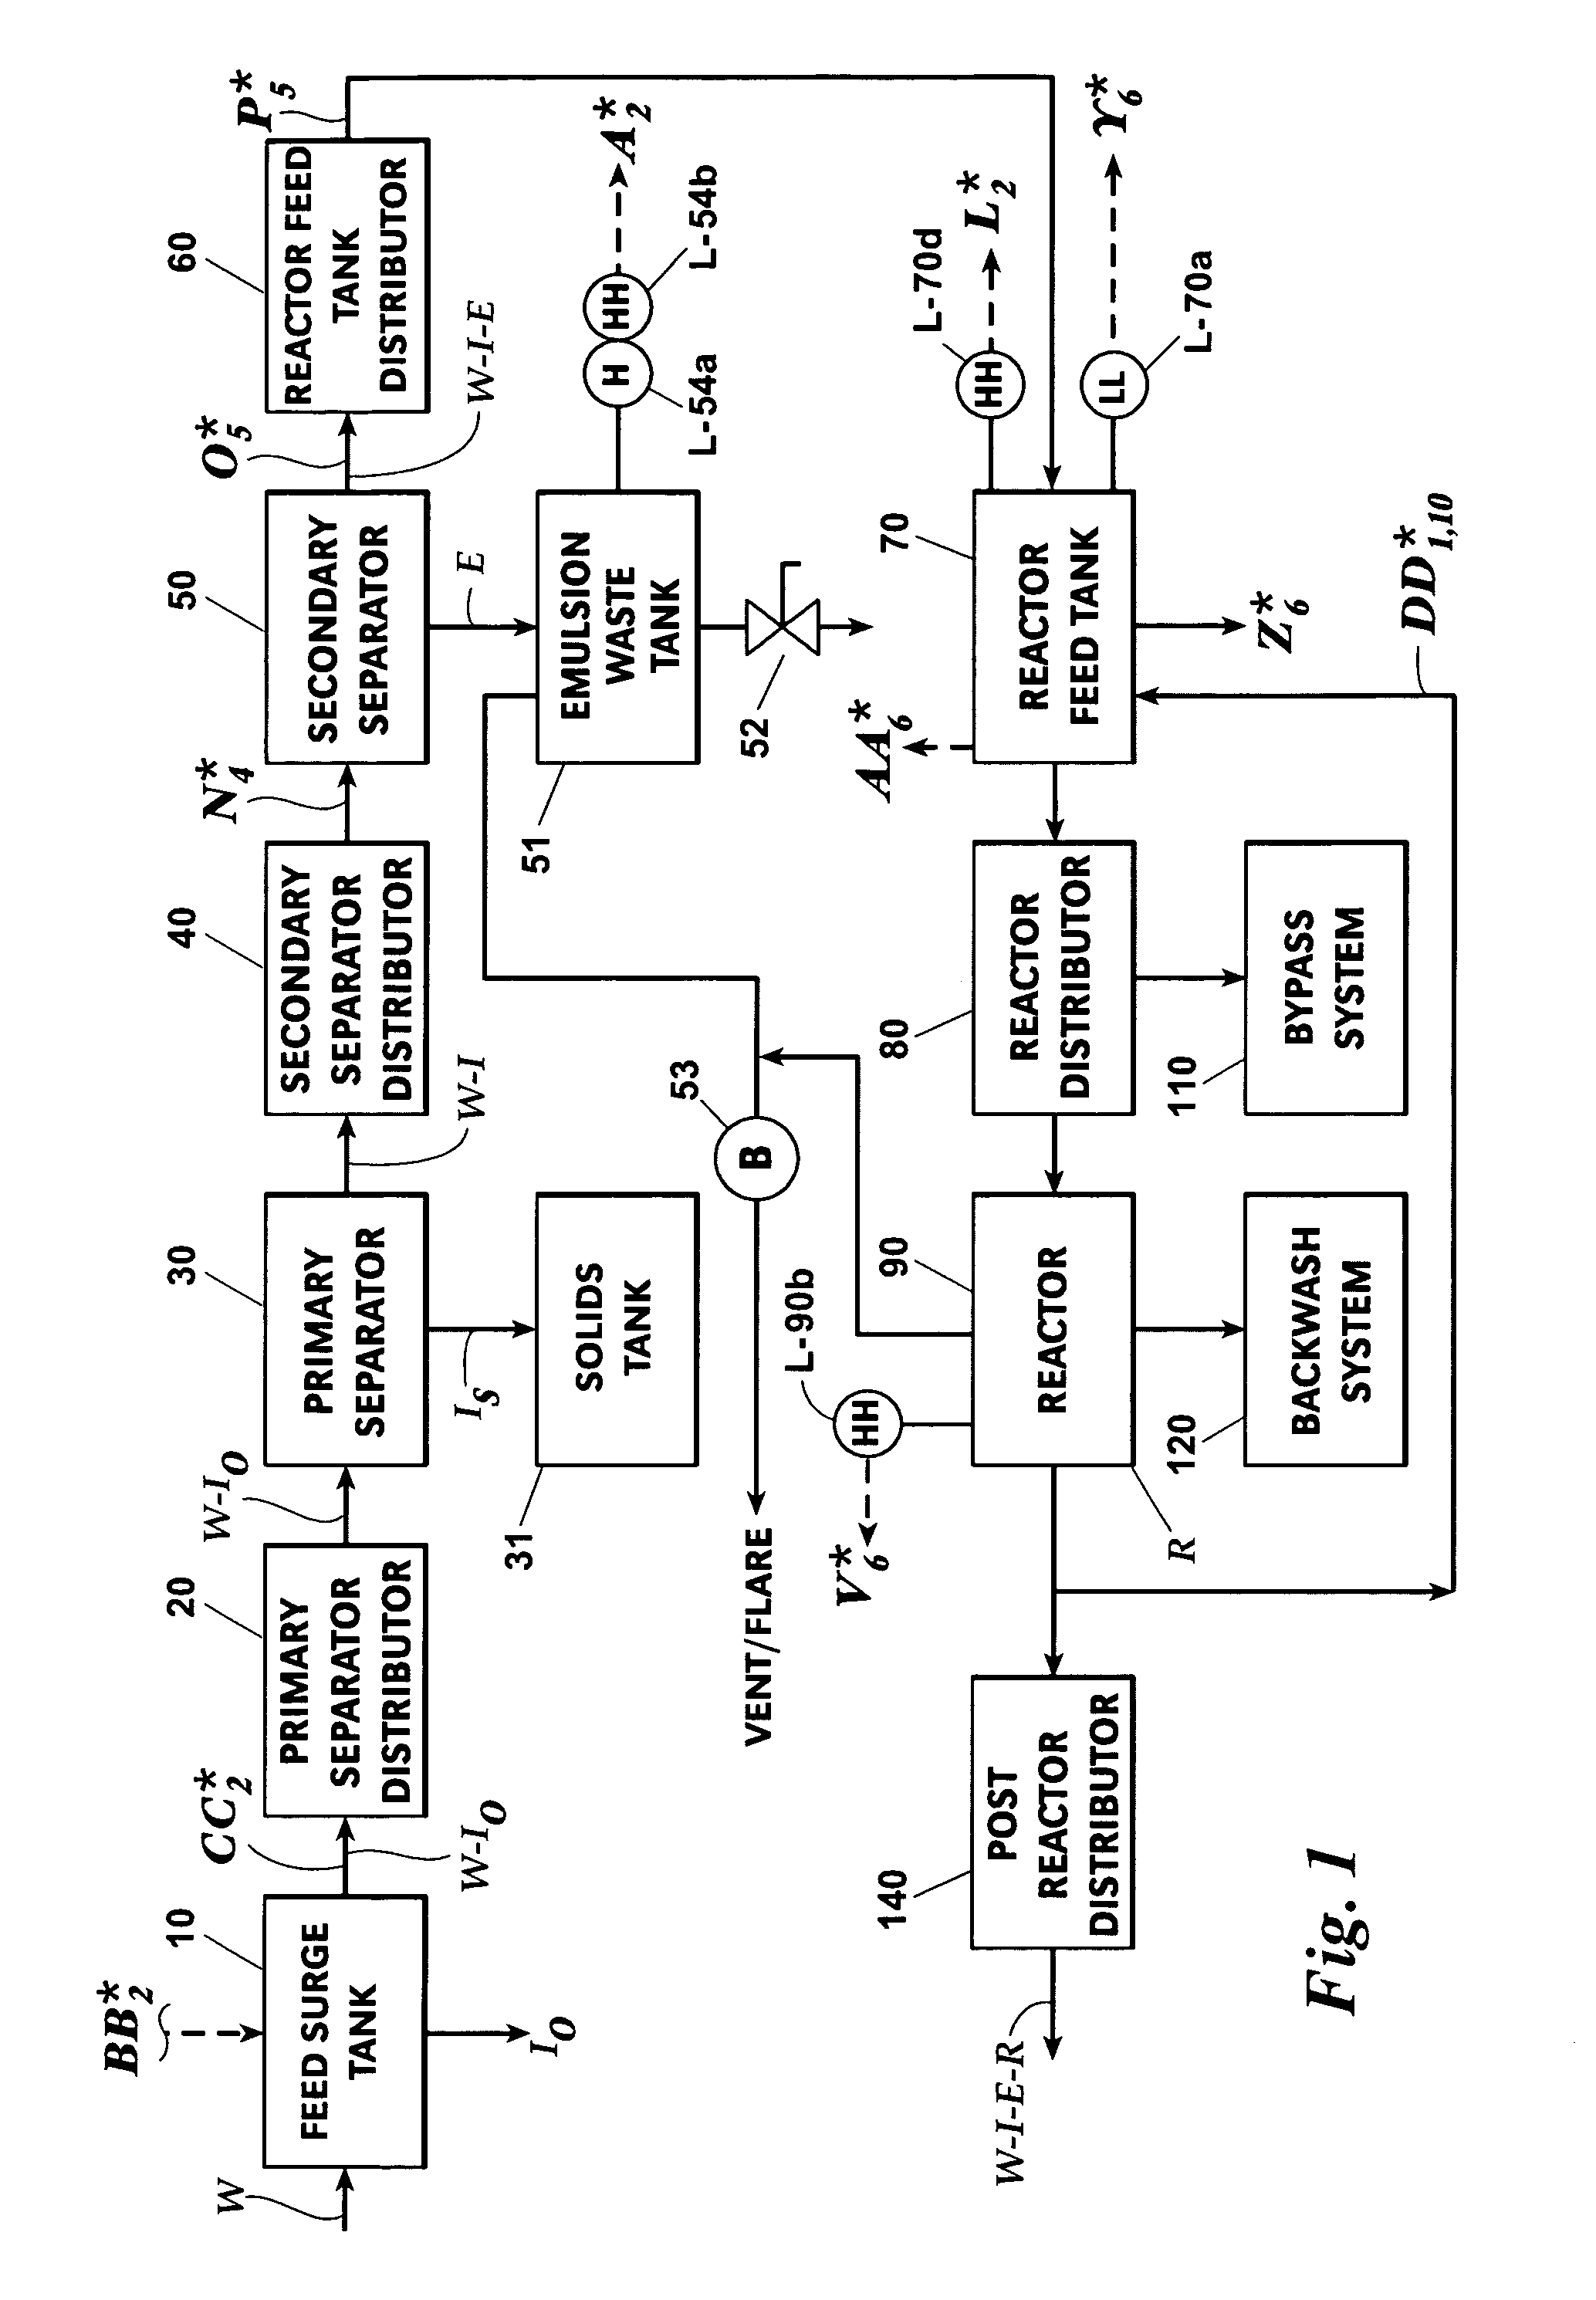 Process for treating industrial effluent water with activated media